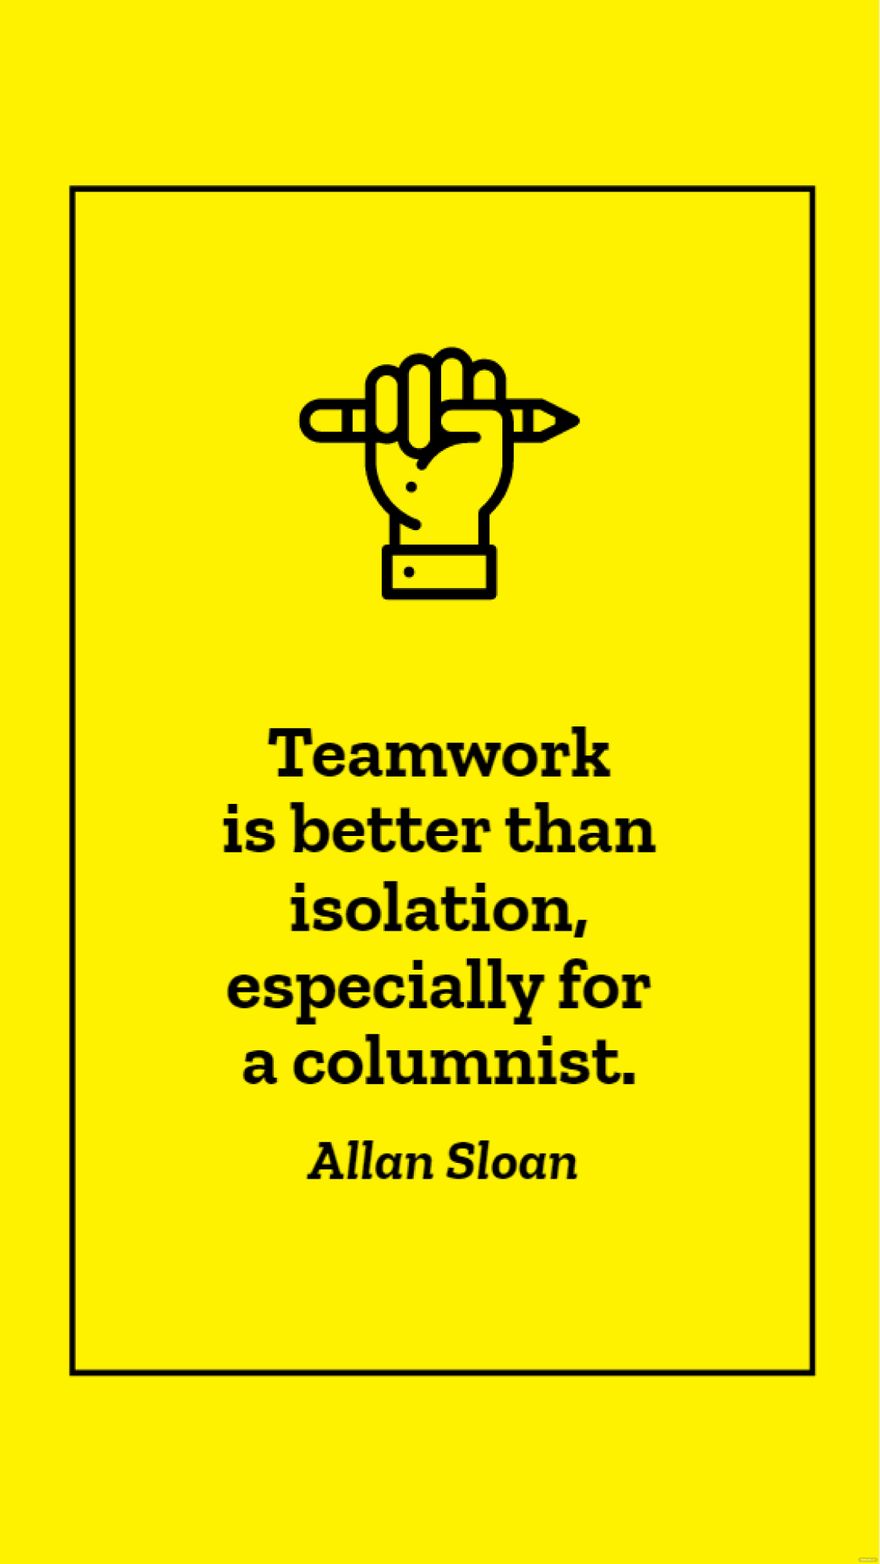 Free Allan Sloan - Teamwork is better than isolation, especially for a columnist. in JPG